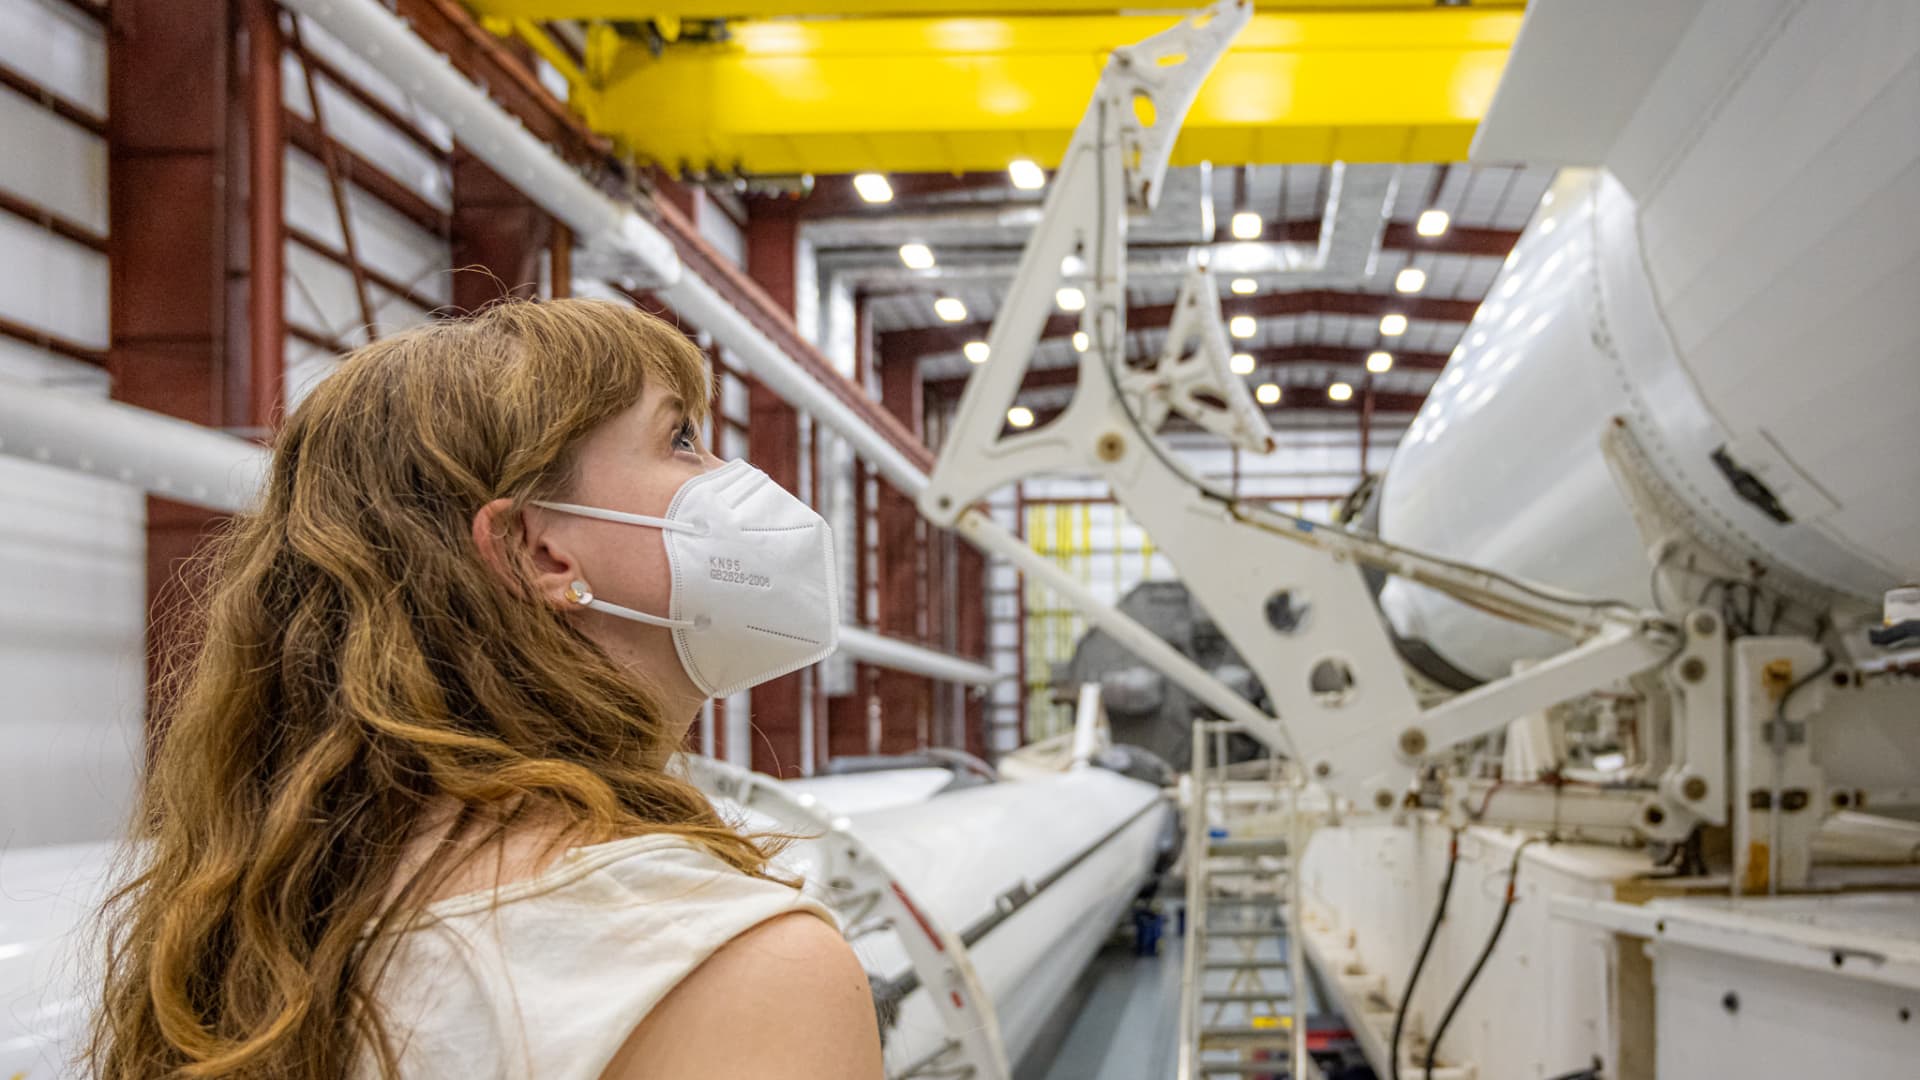 Hayley Arceneaux takes a look at the SpaceX Crew Dragon capsule and Falcon 9 rocket that will carry the crew to orbit.